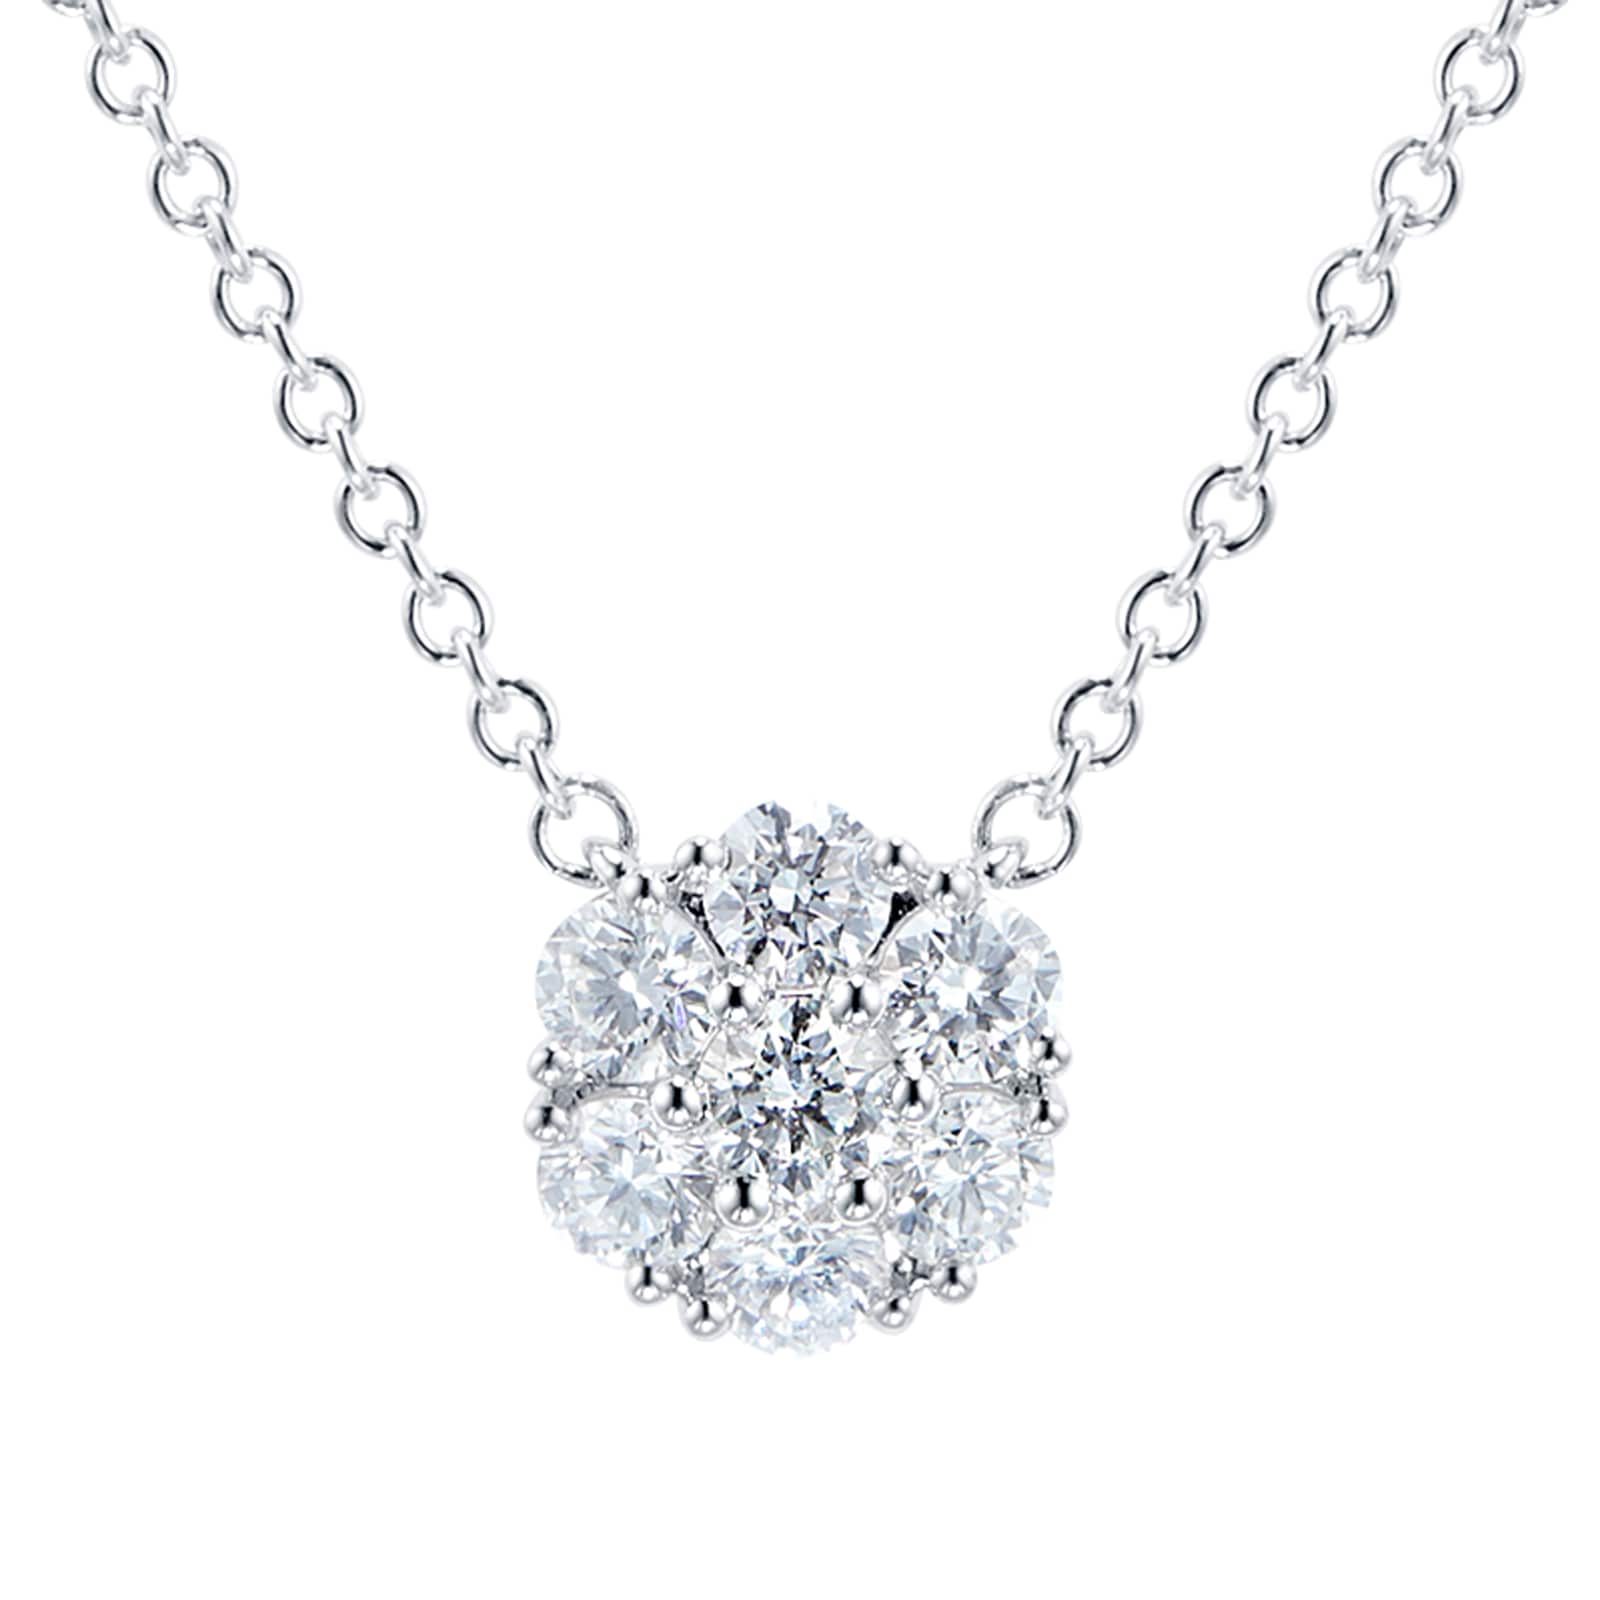 Jacob & Co. - The stunning Sapphire Diamond Necklace comes with